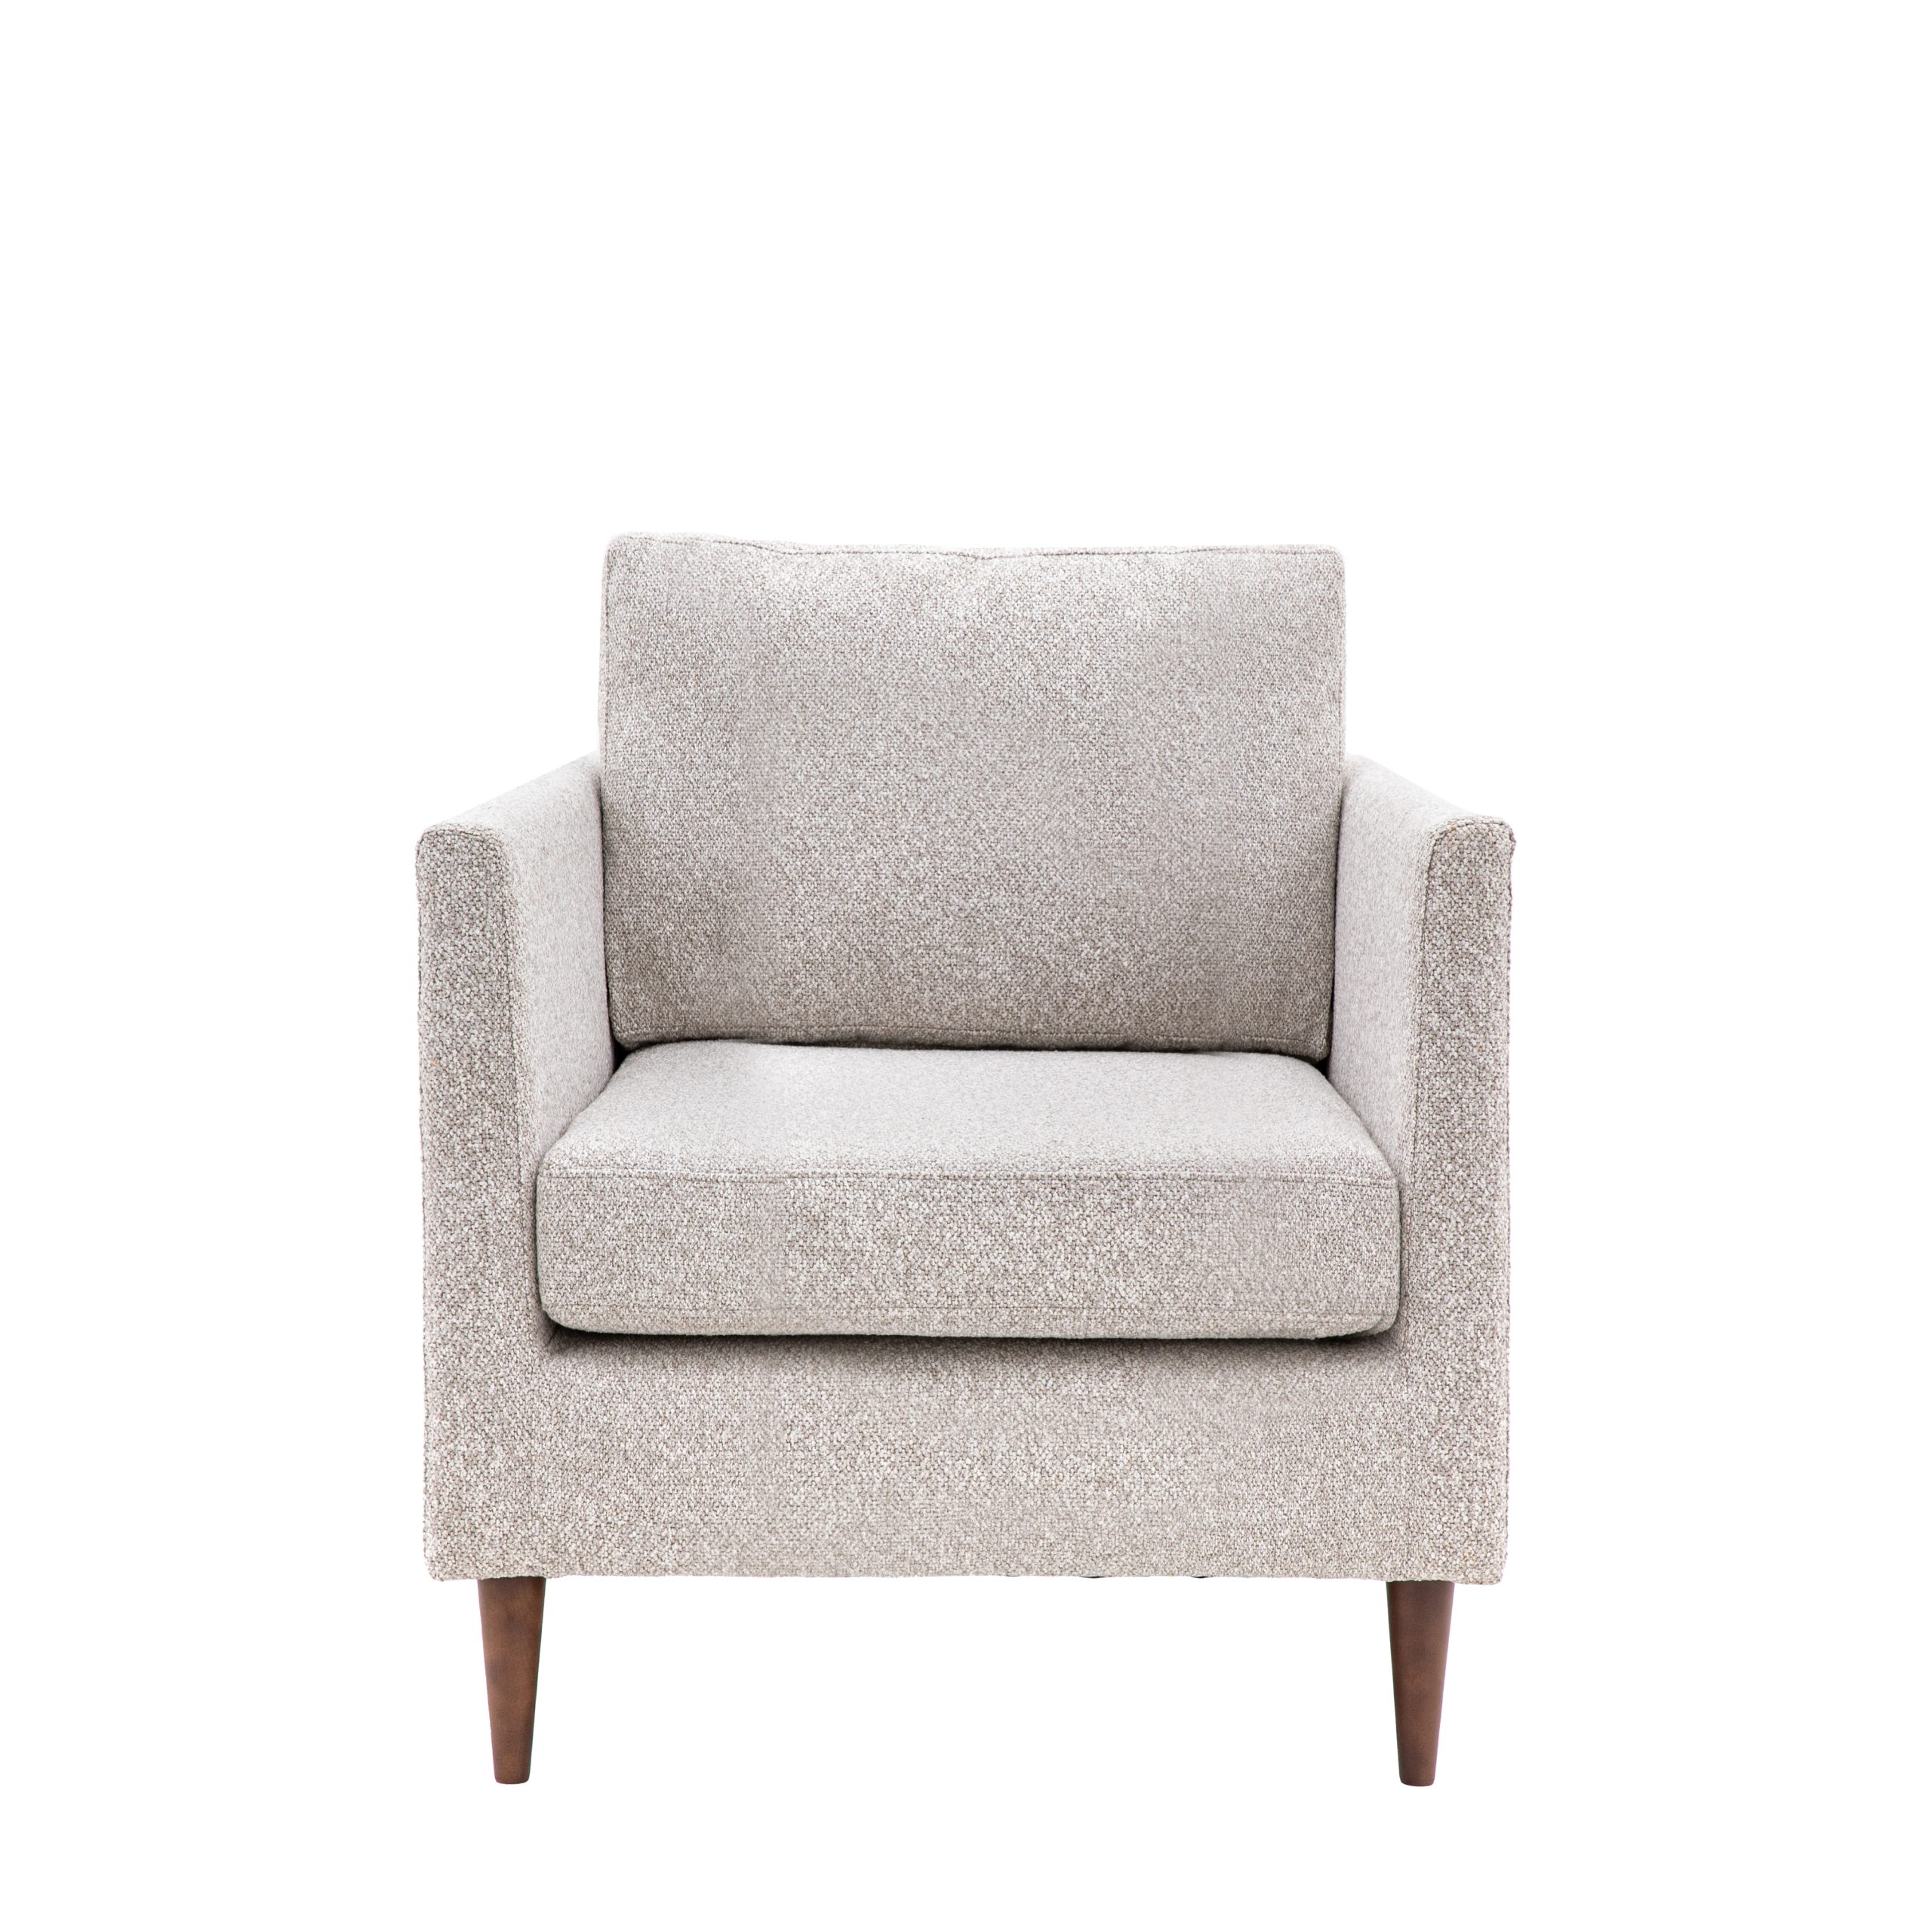 Gallery Direct Gateford Armchair Natural